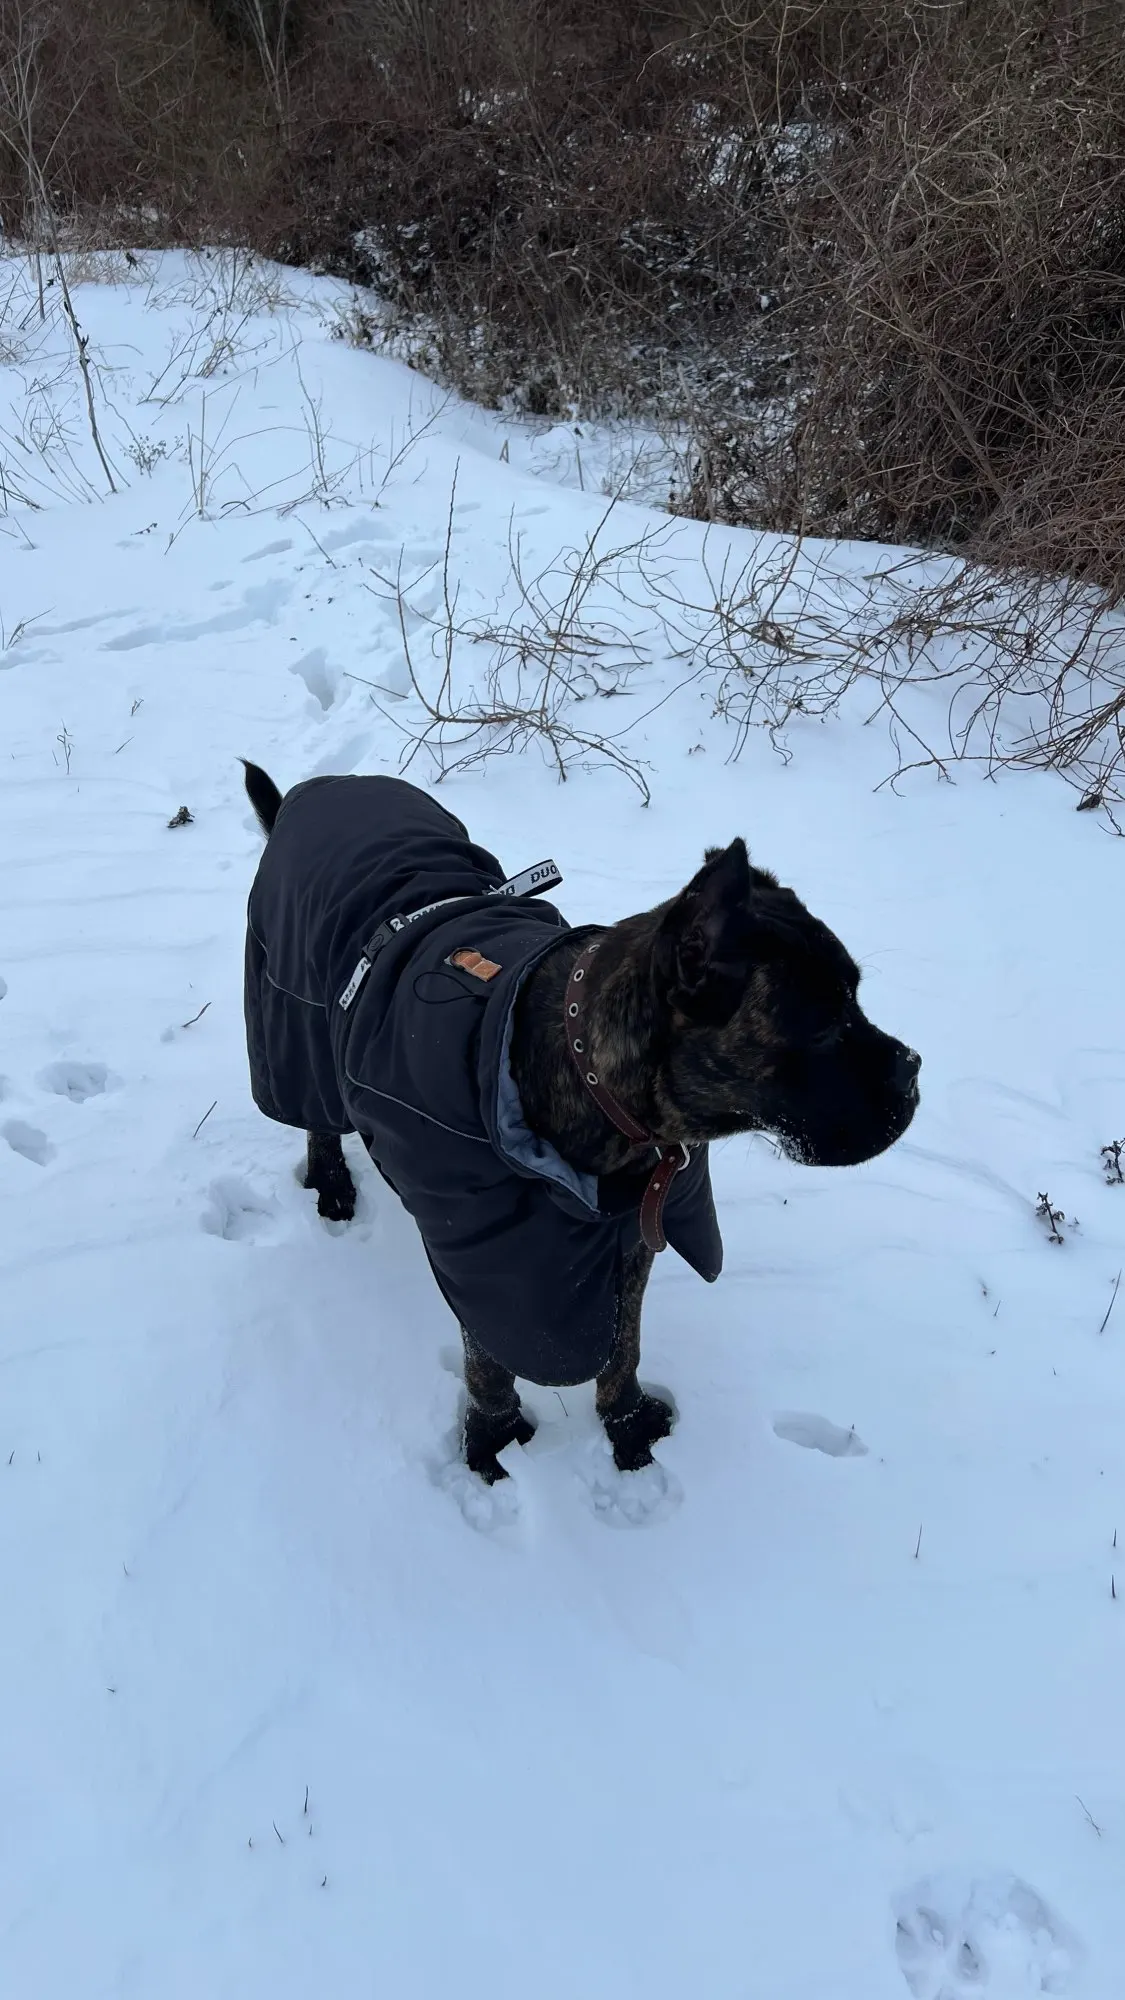 Windproof Reflective Winter Jacket for Medium to Large Dogs - Keep Your French Bulldog, Dachshund, or Labrador Cozy and Safe photo review